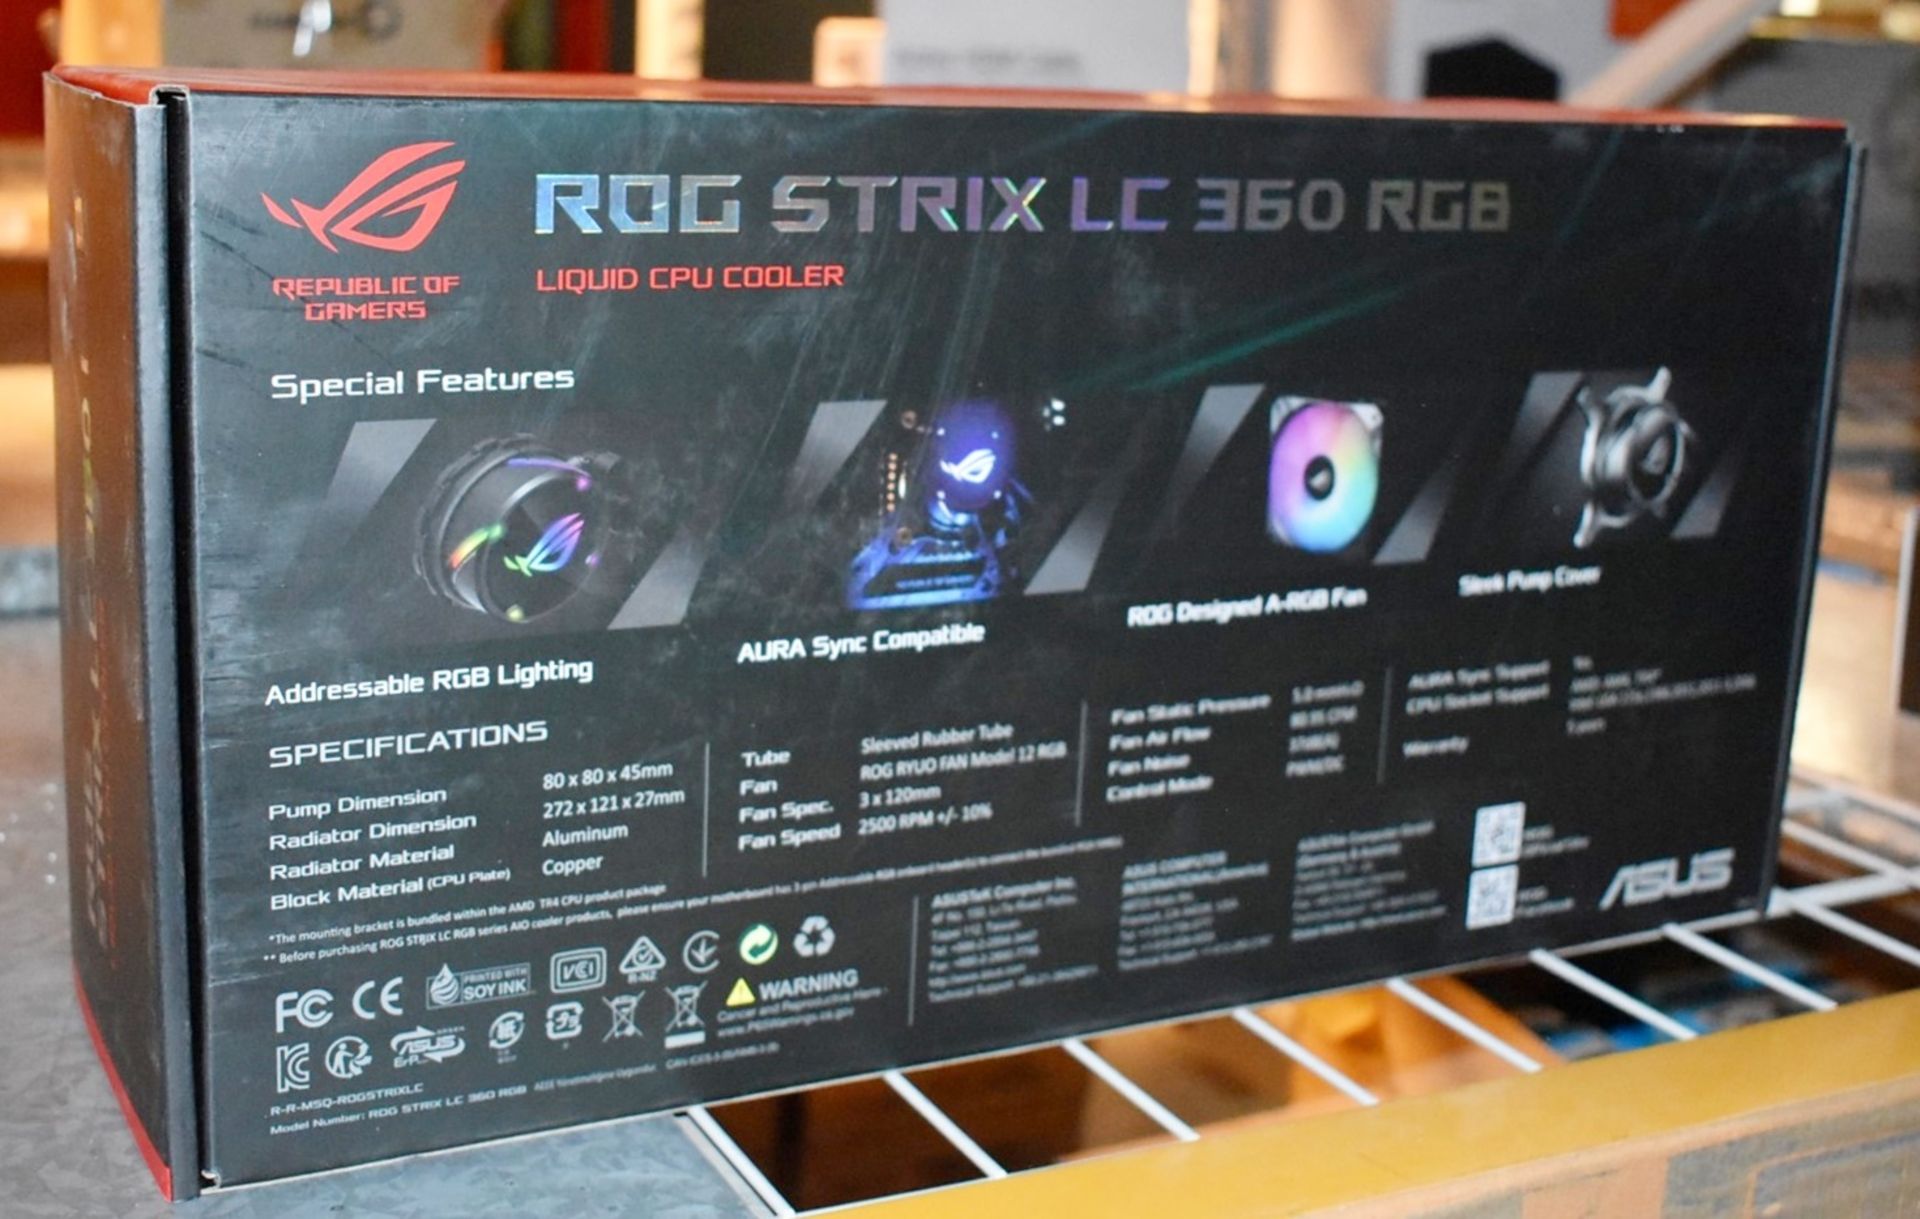 1 x Asus ROG Strix LC 360 RGB Liquid CPU Cooler With Three 120mm Fans - Suitable For AMD and Intel - Image 3 of 6